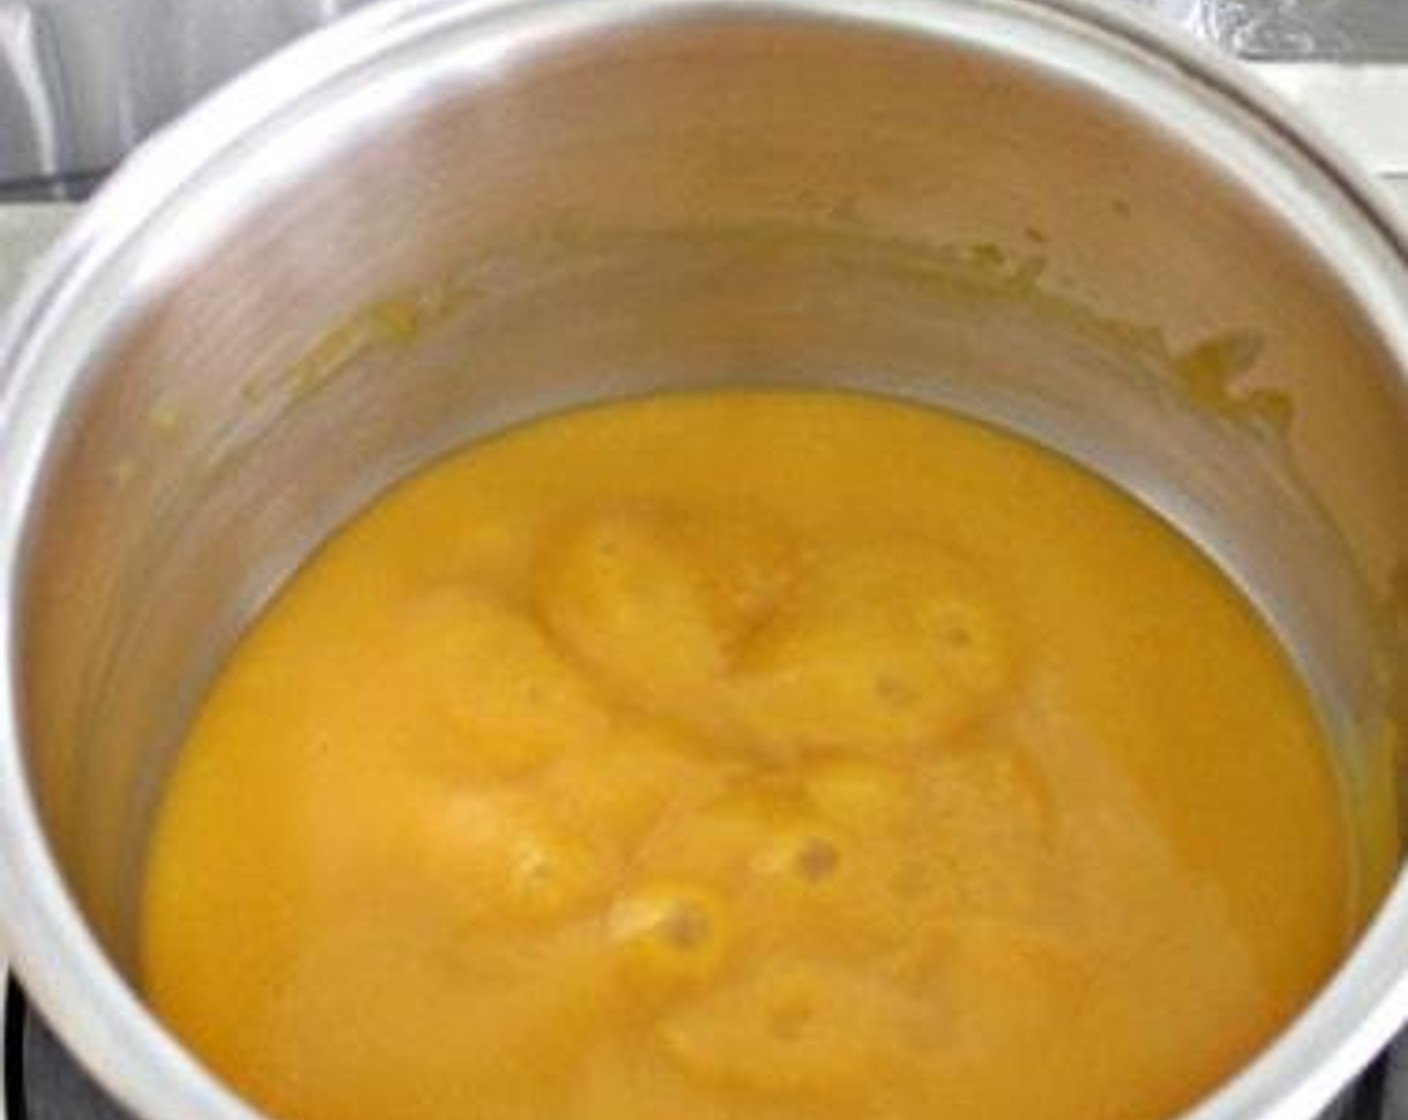 step 3 Combine blended pumpkin, Yakult (3/4 cup), the juice from Lemon (1) and Granulated Sugar (2 Tbsp) together in a pot. Stir well and bring to boil. Lower heat and keep stirring the pumpkin mixture for about 20-25 minutes until thickened.